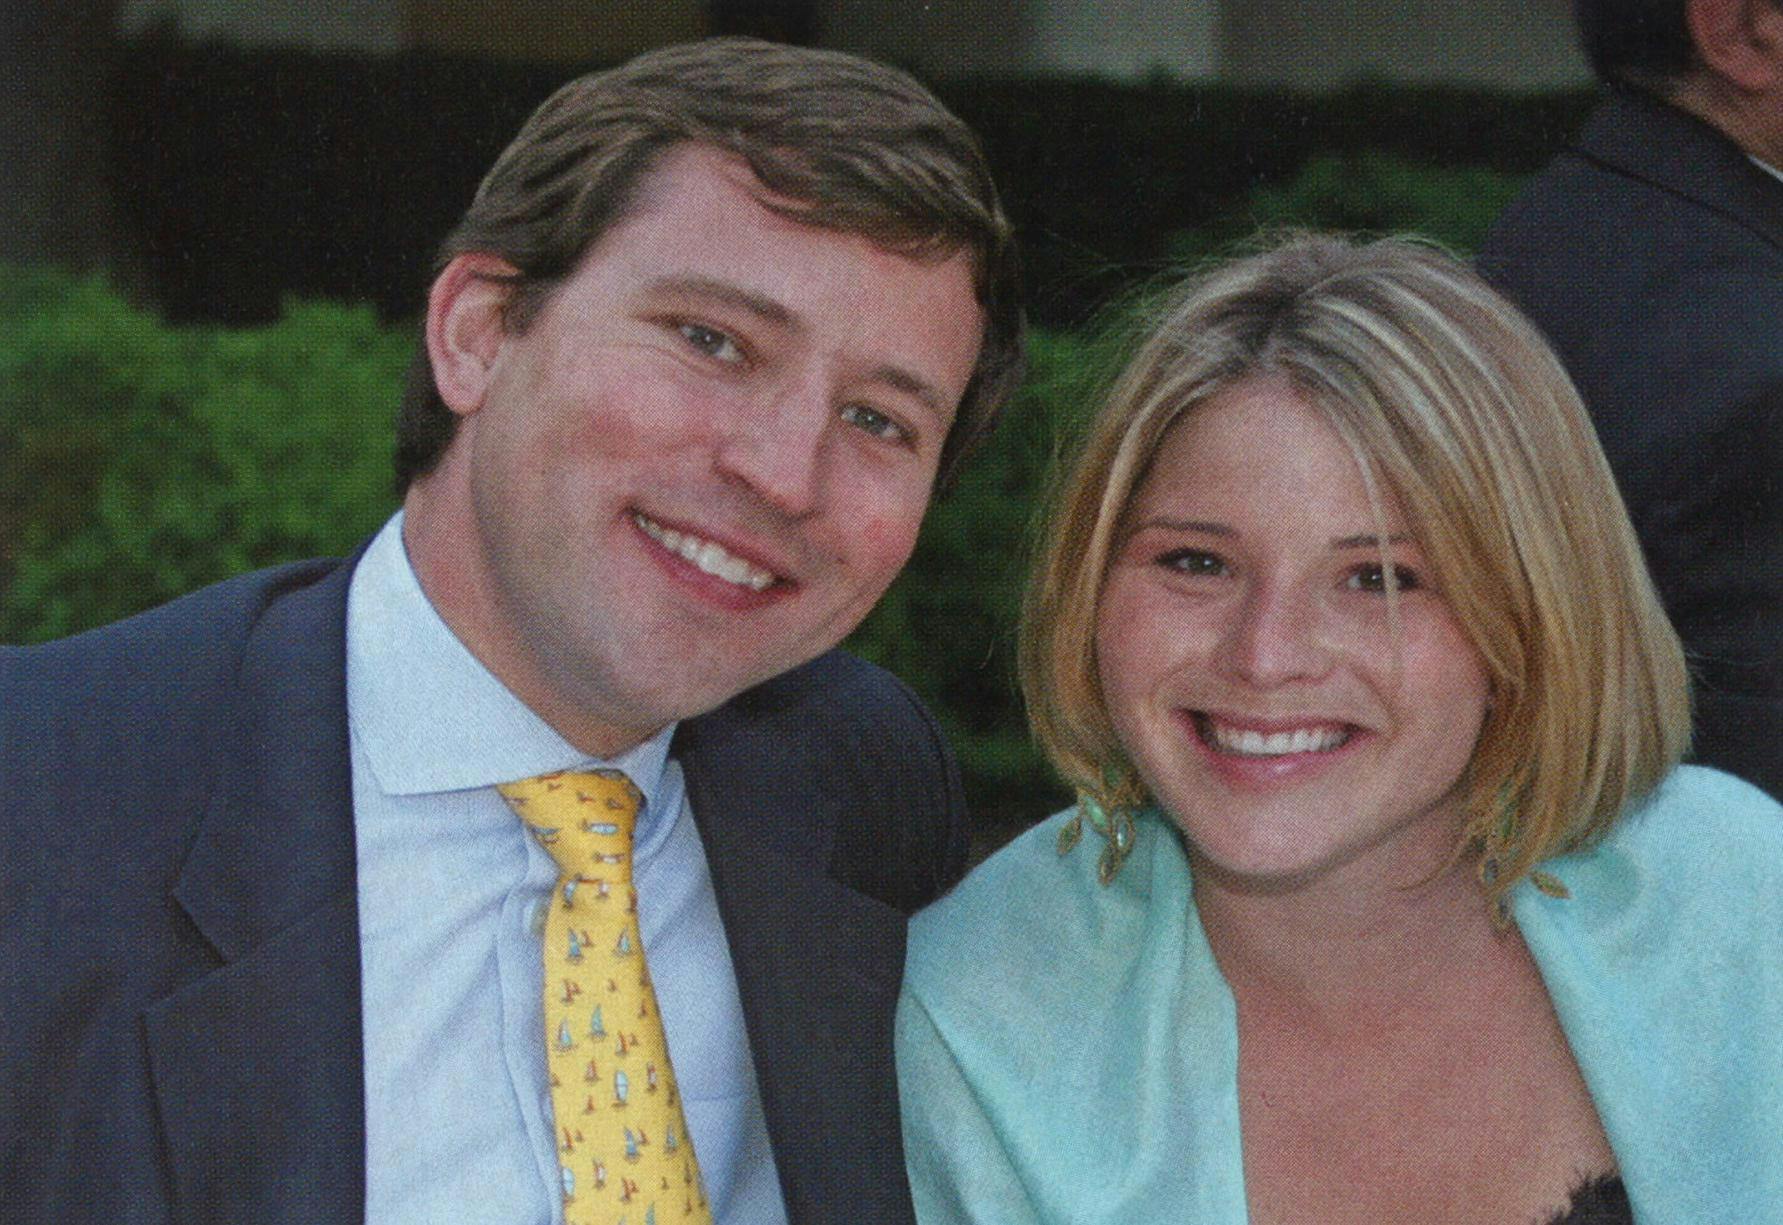 Jenna Bush smiling with her fiance, Henry Hager. 